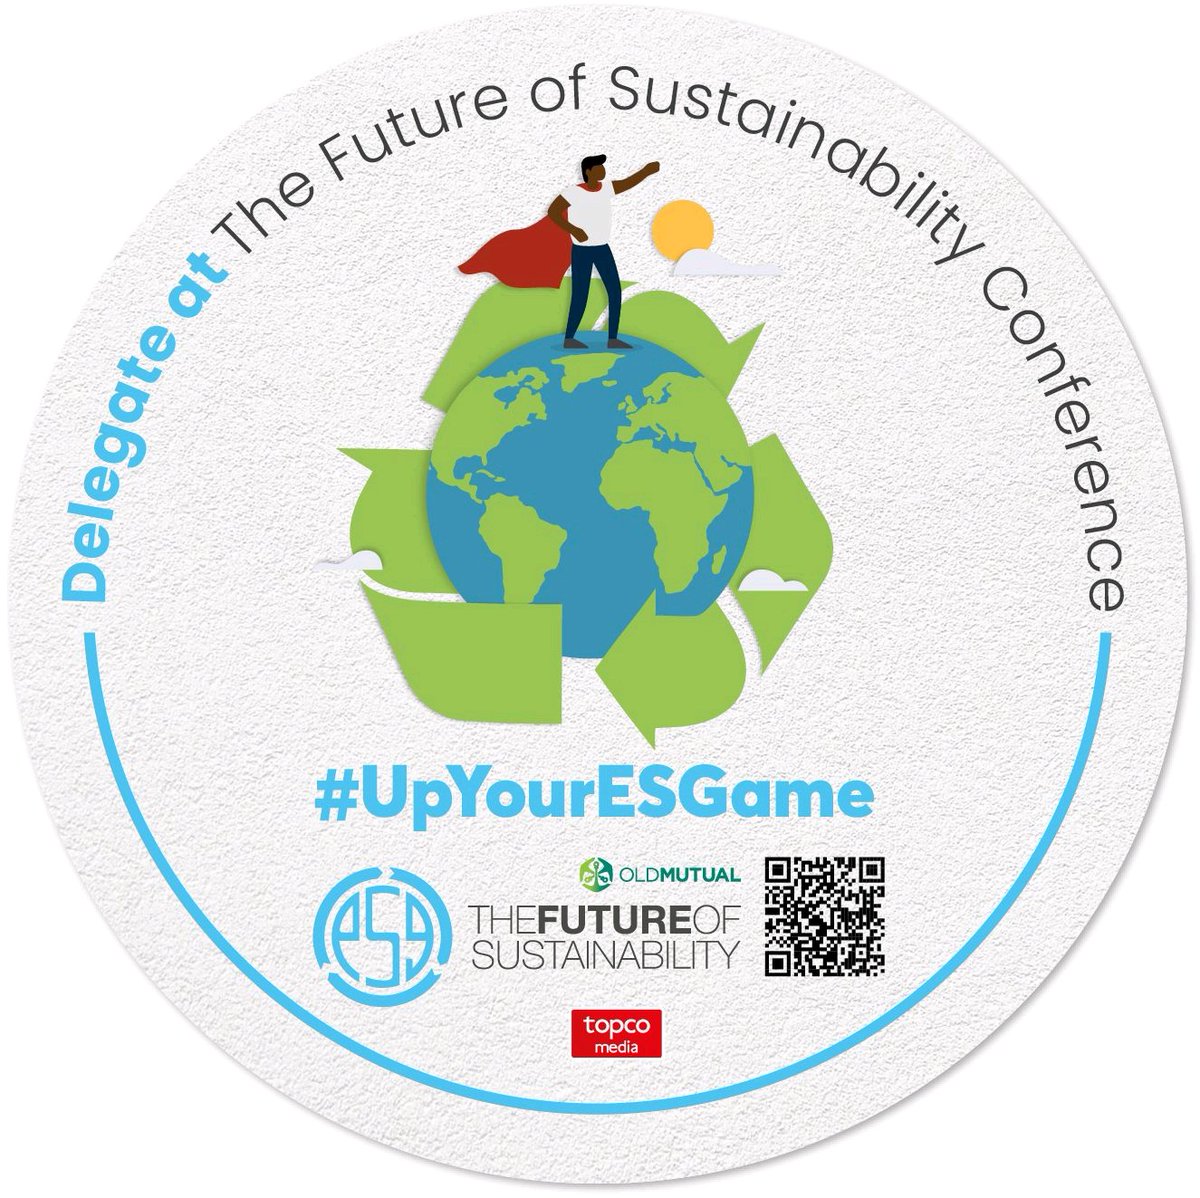 Looking forward to a day full of engagement, that will shape our today, tomorrow and our forever. 
#FOS22
#UpYourESGame
#BeanESGenius
#ESGAfrica
#FOSAfrica
#Futureofsustainability